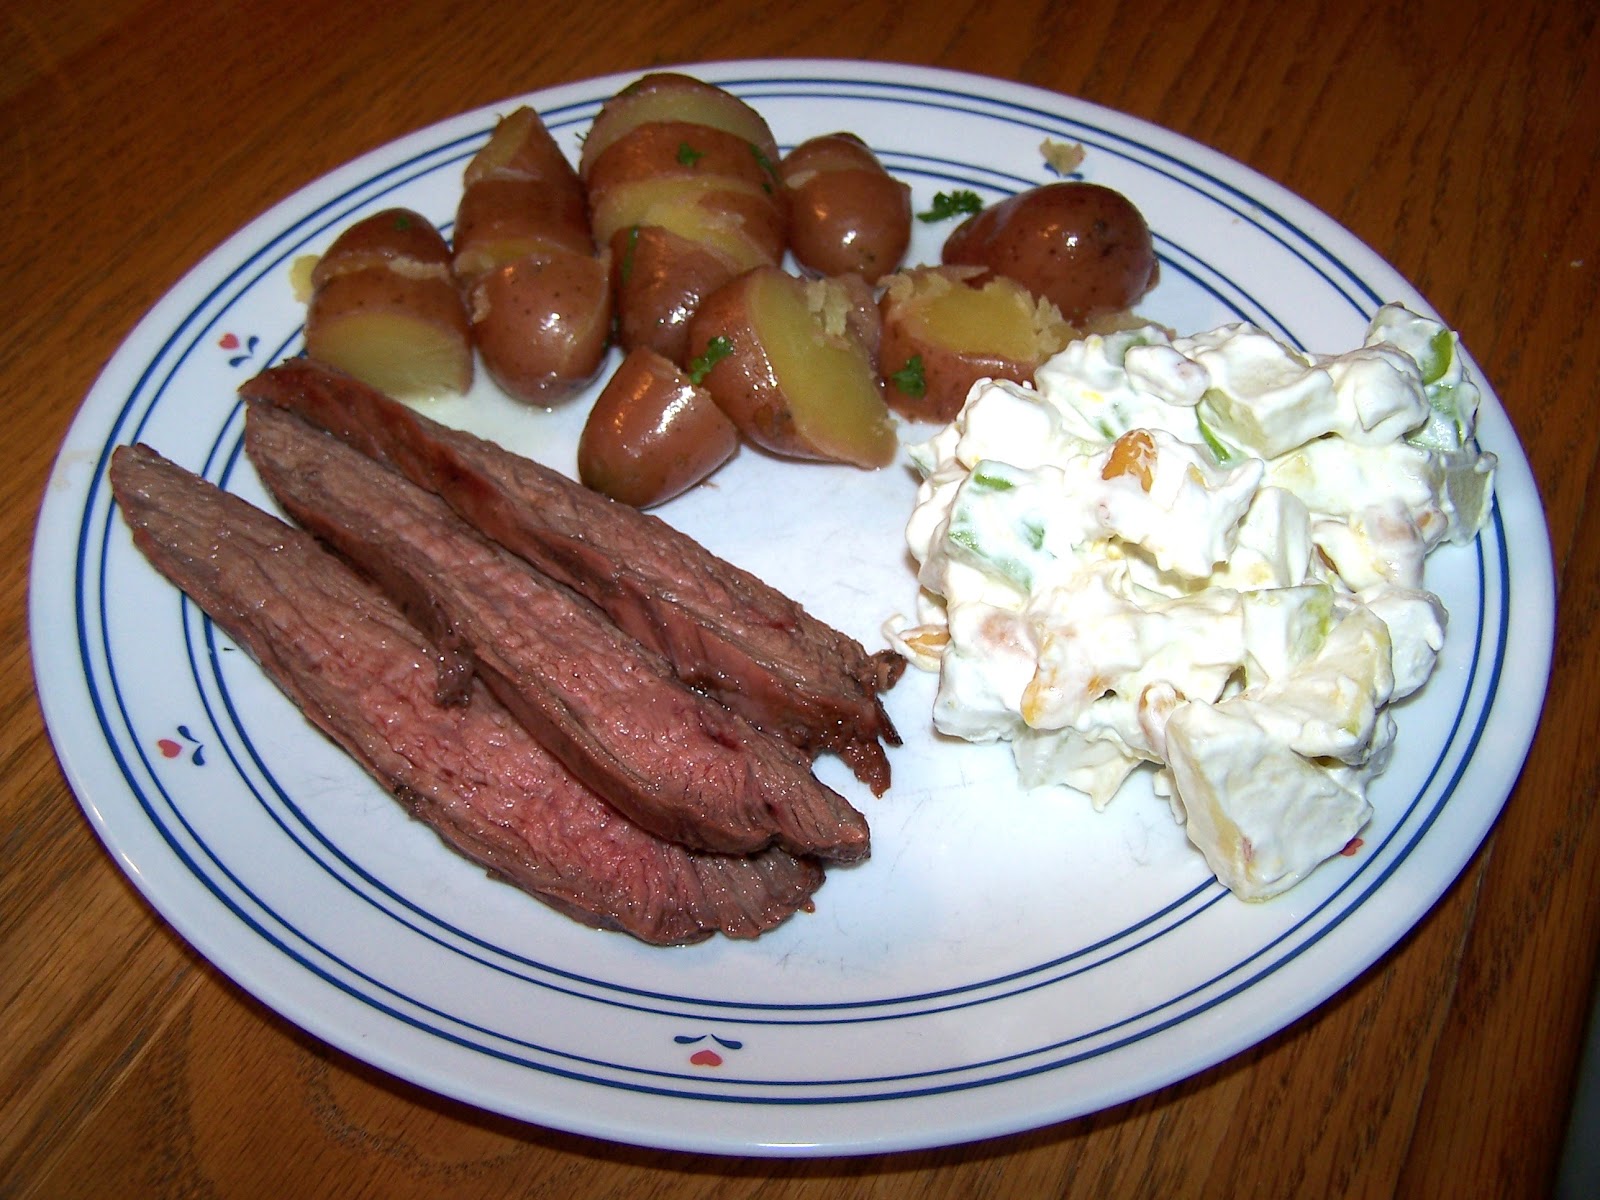 Flank steak, buttered red potatoes and taffy apple salad